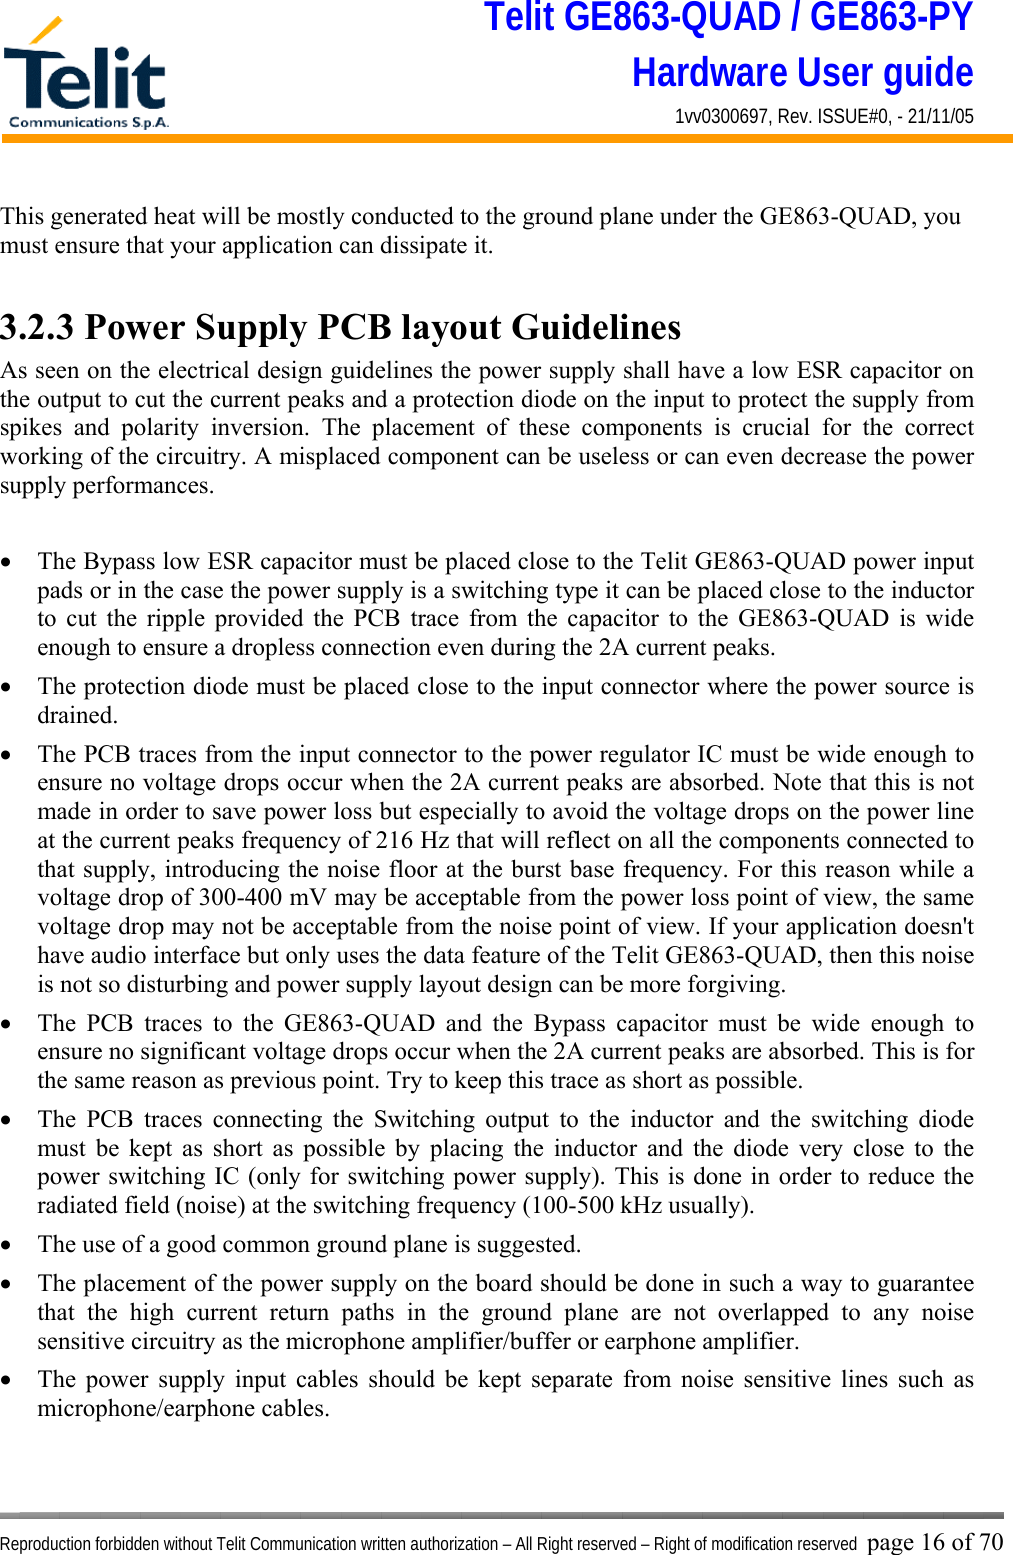 Telit GE863-QUAD / GE863-PY Hardware User guide 1vv0300697, Rev. ISSUE#0, - 21/11/05    Reproduction forbidden without Telit Communication written authorization – All Right reserved – Right of modification reserved page 16 of 70 This generated heat will be mostly conducted to the ground plane under the GE863-QUAD, you must ensure that your application can dissipate it.  3.2.3 Power Supply PCB layout Guidelines As seen on the electrical design guidelines the power supply shall have a low ESR capacitor on the output to cut the current peaks and a protection diode on the input to protect the supply from spikes and polarity inversion. The placement of these components is crucial for the correct working of the circuitry. A misplaced component can be useless or can even decrease the power supply performances.  •  The Bypass low ESR capacitor must be placed close to the Telit GE863-QUAD power input pads or in the case the power supply is a switching type it can be placed close to the inductor to cut the ripple provided the PCB trace from the capacitor to the GE863-QUAD is wide enough to ensure a dropless connection even during the 2A current peaks. •  The protection diode must be placed close to the input connector where the power source is drained. •  The PCB traces from the input connector to the power regulator IC must be wide enough to ensure no voltage drops occur when the 2A current peaks are absorbed. Note that this is not made in order to save power loss but especially to avoid the voltage drops on the power line at the current peaks frequency of 216 Hz that will reflect on all the components connected to that supply, introducing the noise floor at the burst base frequency. For this reason while a voltage drop of 300-400 mV may be acceptable from the power loss point of view, the same voltage drop may not be acceptable from the noise point of view. If your application doesn&apos;t have audio interface but only uses the data feature of the Telit GE863-QUAD, then this noise is not so disturbing and power supply layout design can be more forgiving. •  The PCB traces to the GE863-QUAD and the Bypass capacitor must be wide enough to ensure no significant voltage drops occur when the 2A current peaks are absorbed. This is for the same reason as previous point. Try to keep this trace as short as possible. •  The PCB traces connecting the Switching output to the inductor and the switching diode must be kept as short as possible by placing the inductor and the diode very close to the power switching IC (only for switching power supply). This is done in order to reduce the radiated field (noise) at the switching frequency (100-500 kHz usually). •  The use of a good common ground plane is suggested. •  The placement of the power supply on the board should be done in such a way to guarantee that the high current return paths in the ground plane are not overlapped to any noise sensitive circuitry as the microphone amplifier/buffer or earphone amplifier. •  The power supply input cables should be kept separate from noise sensitive lines such as microphone/earphone cables.  